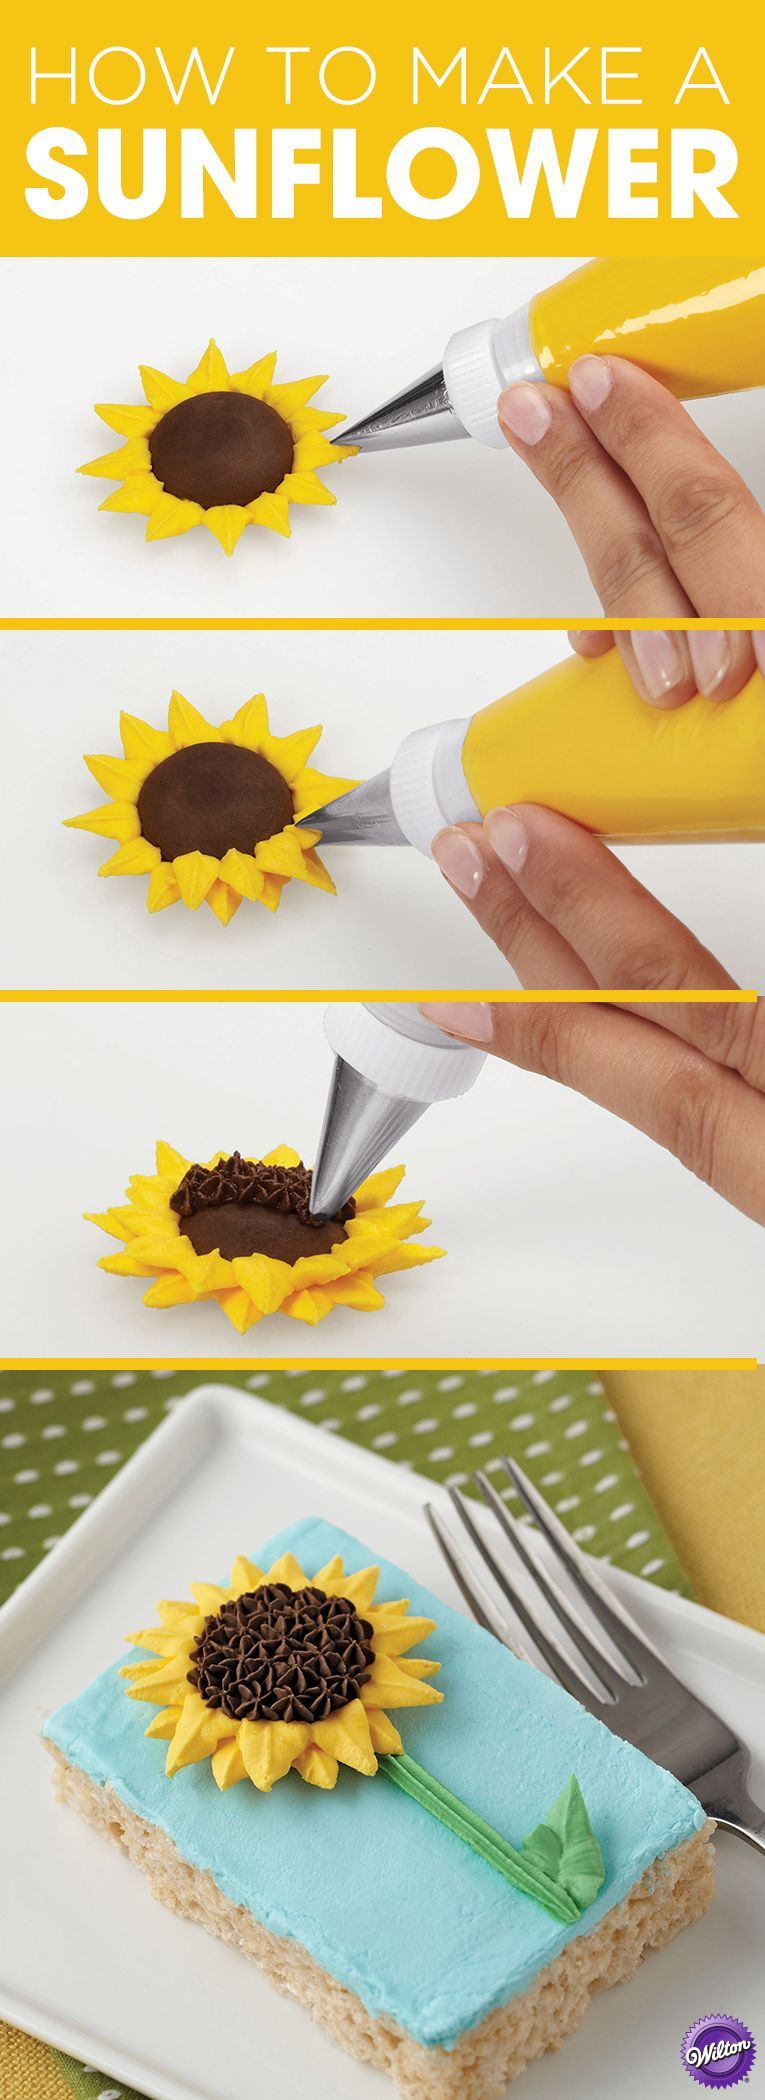 How to Pipe a Sunflower -   21 cake decor step by step ideas